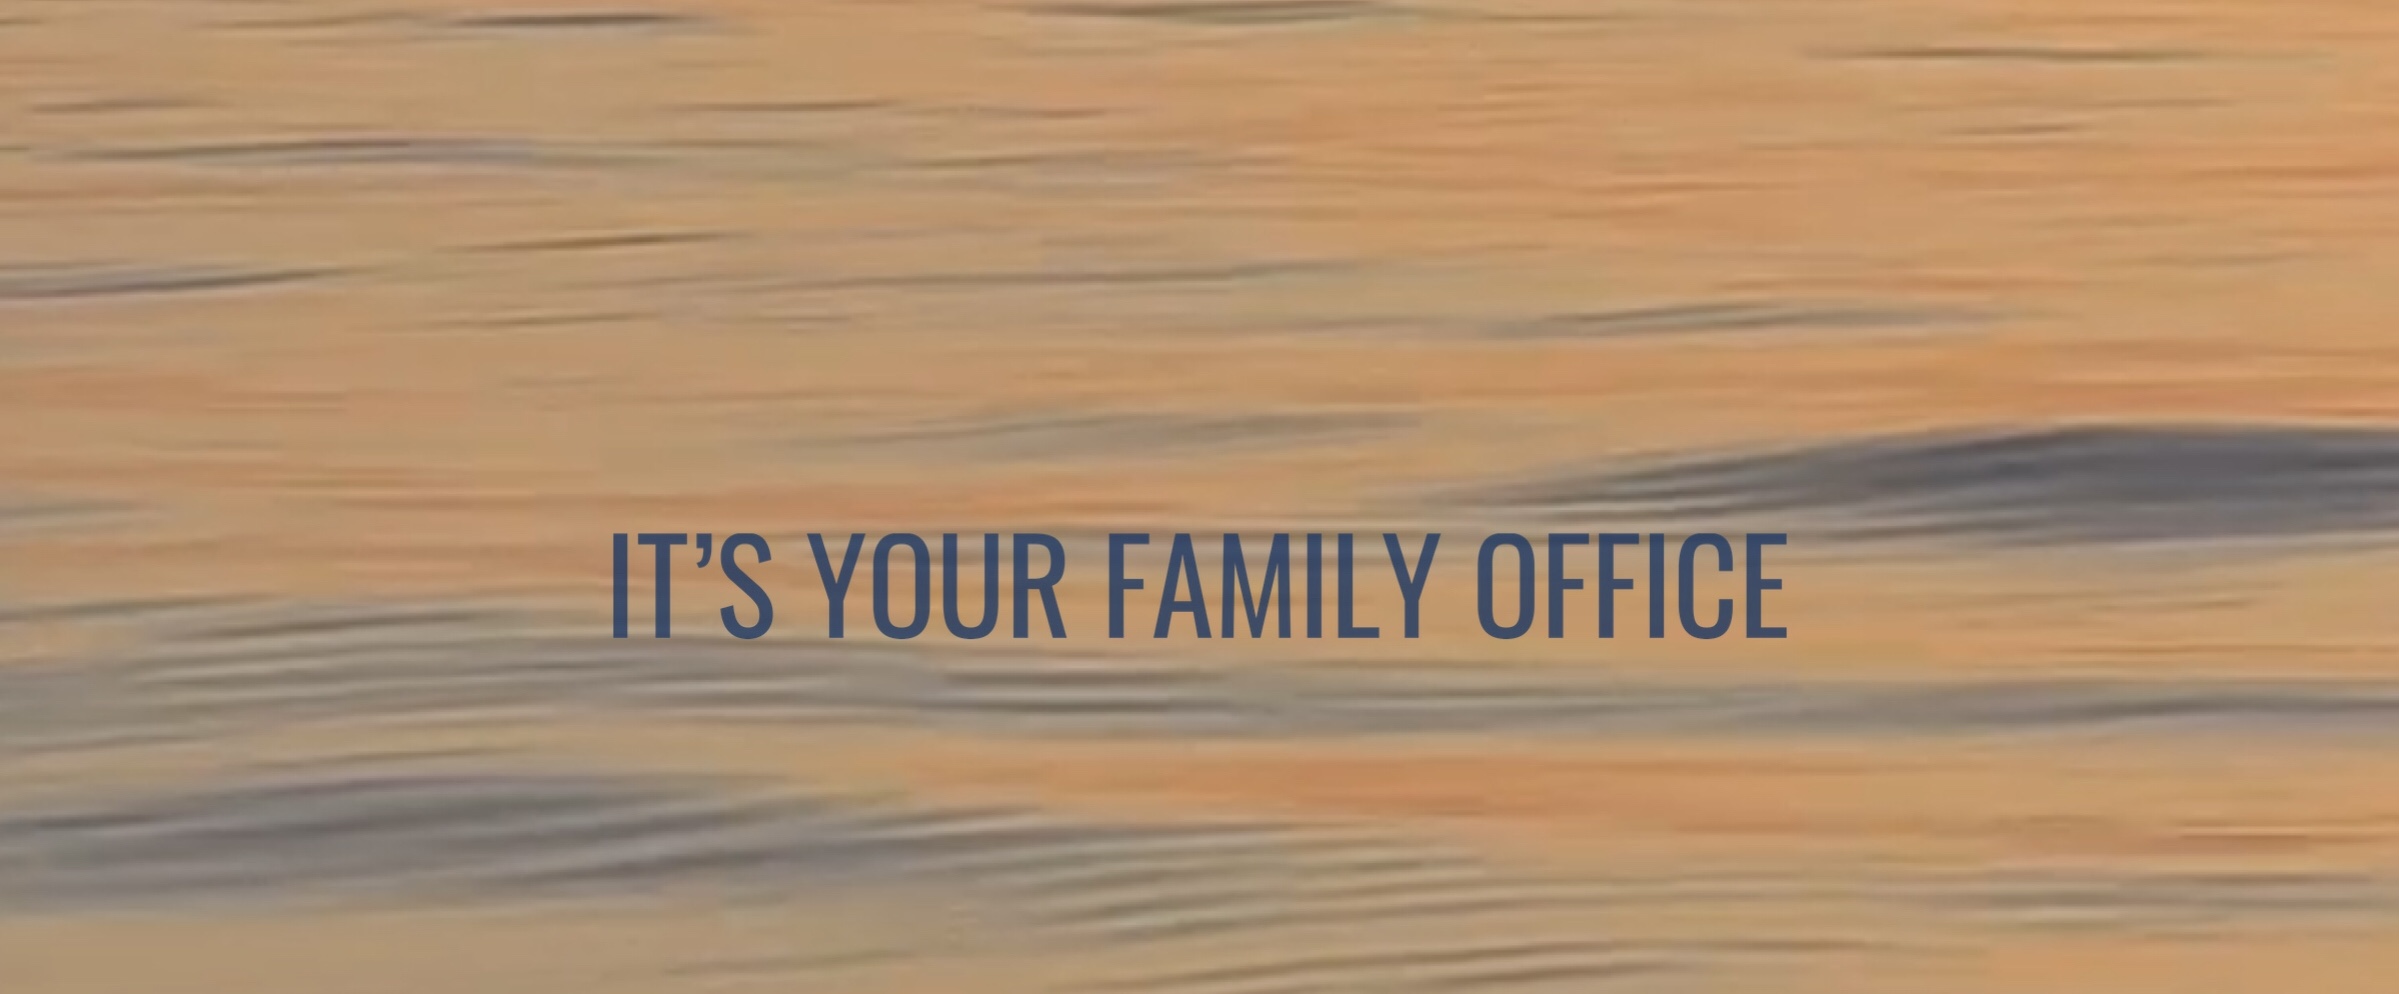 It's Your Family Office, Running Point